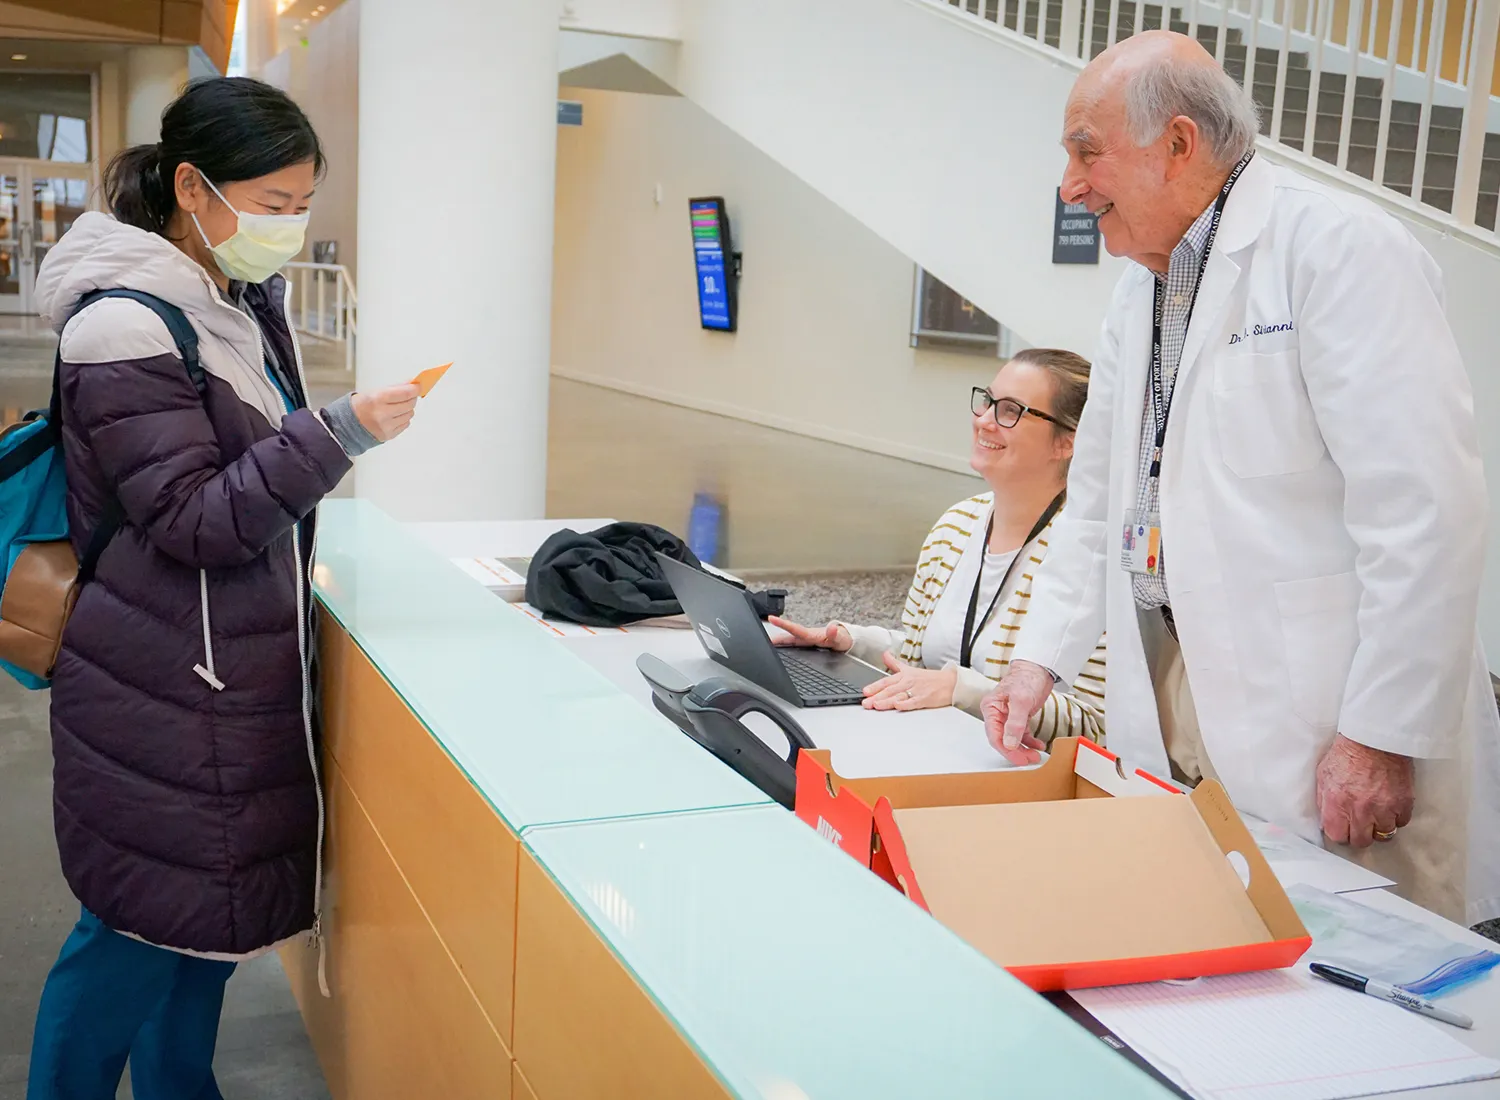 School of Dentistry student receives envelope from two faculty members at a desk.